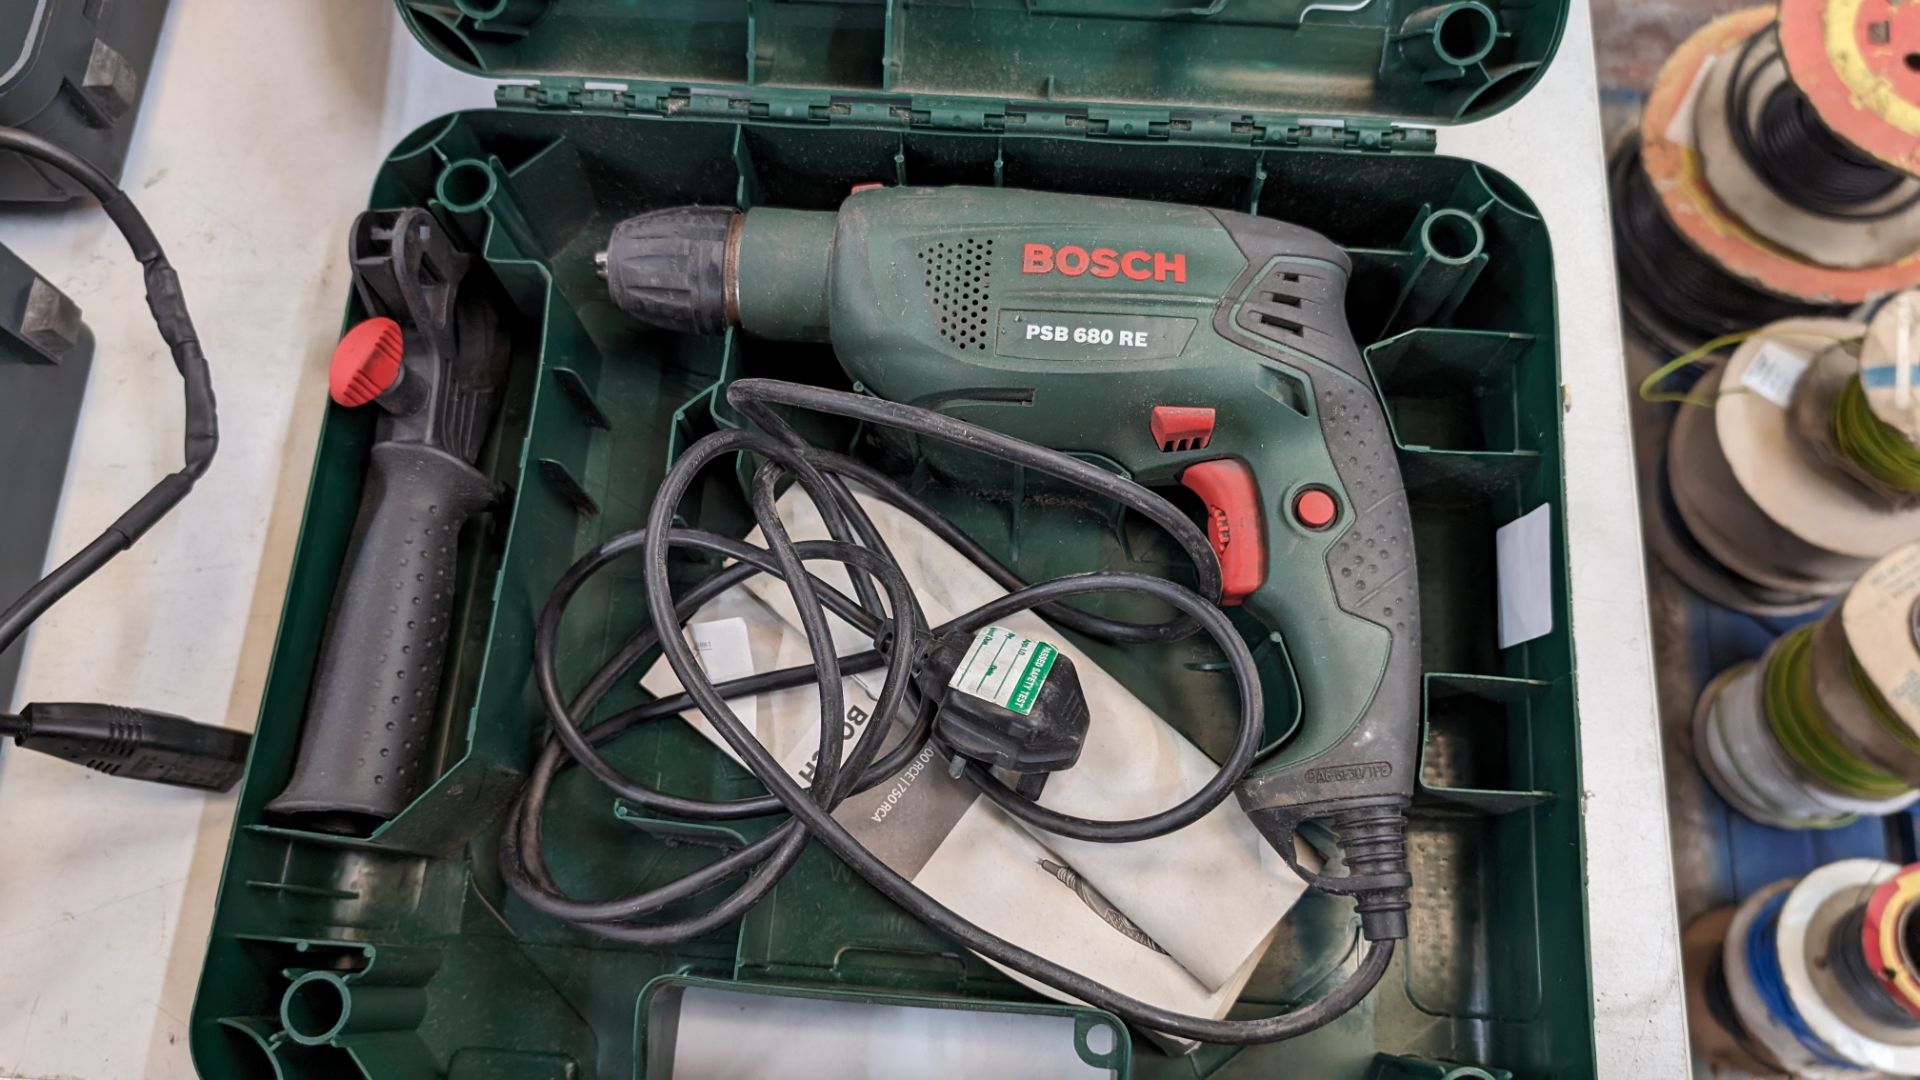 Bosch PSB680RE drill in case - Image 3 of 5